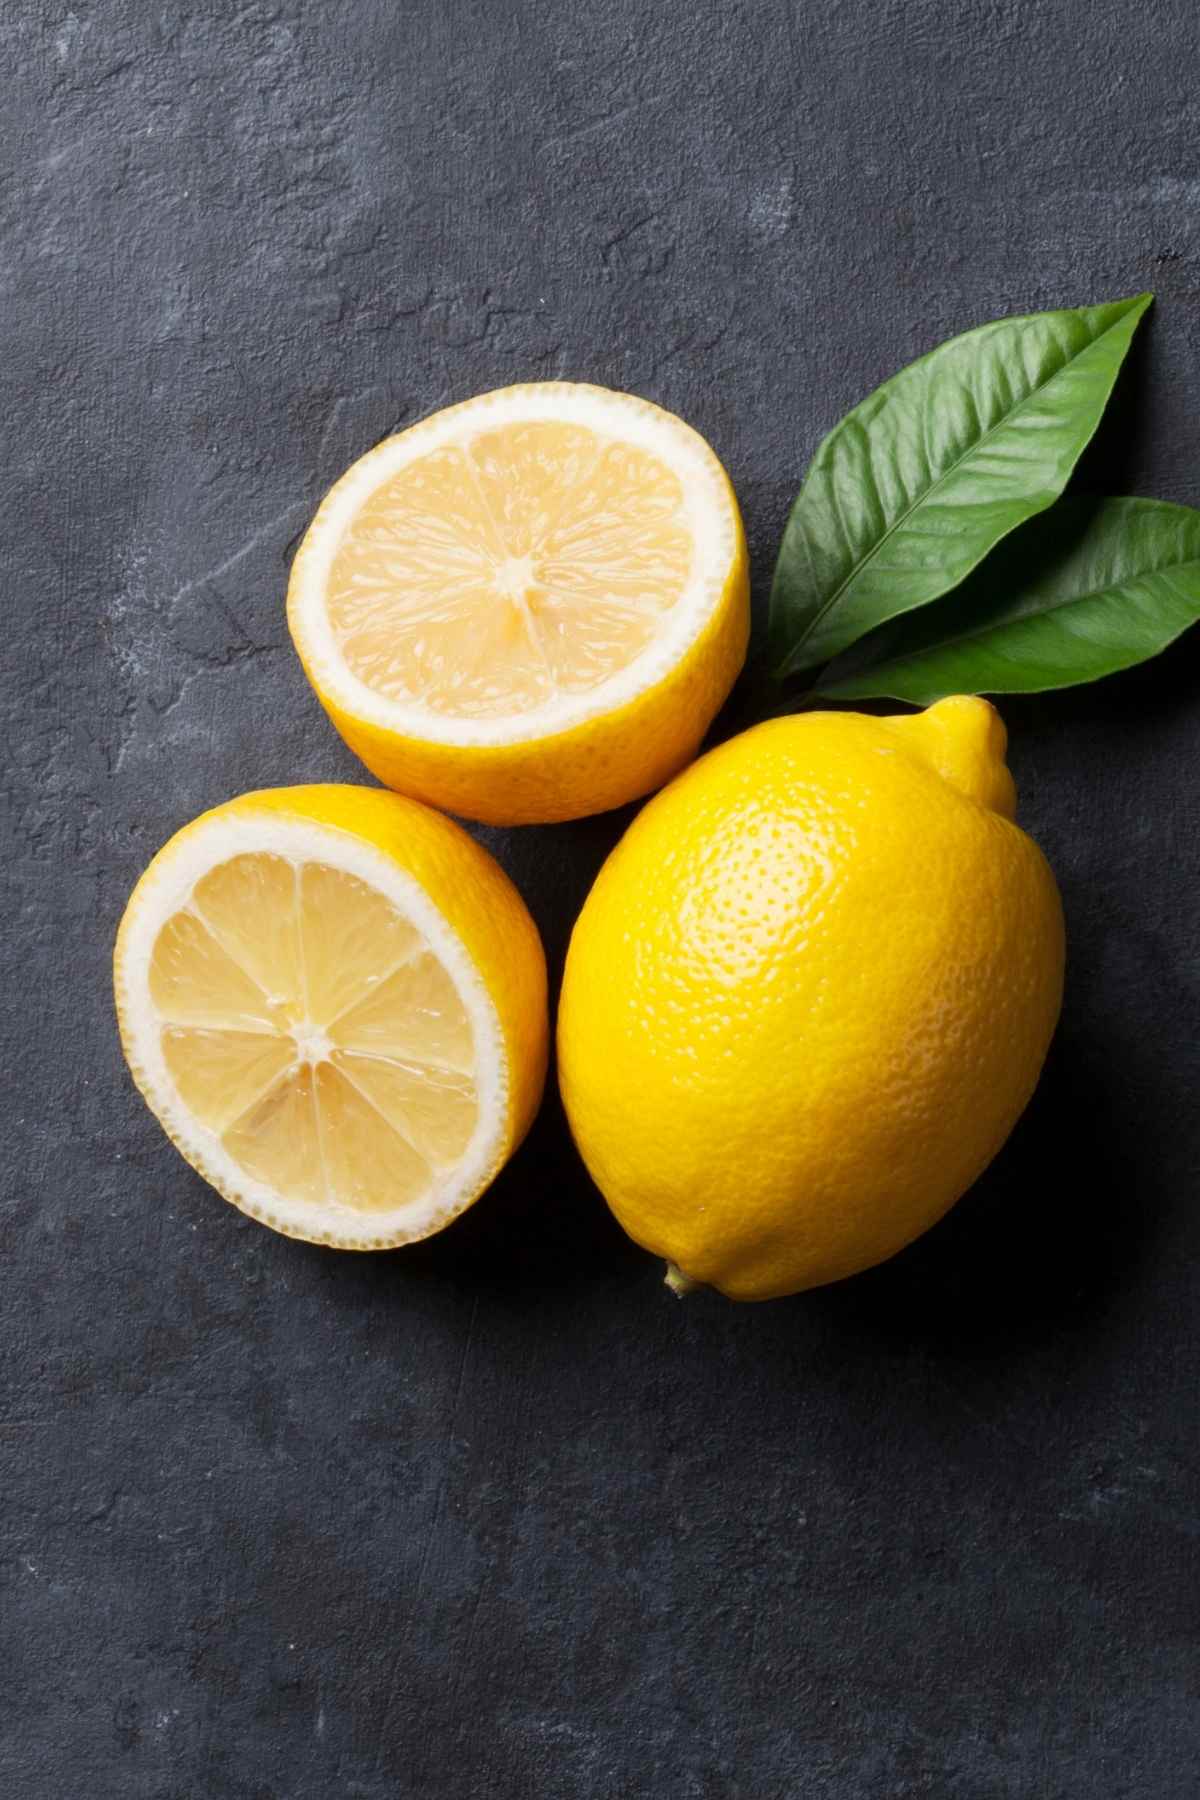 Sweet, sour, bitter and tart - words that describe a lemon or a lime? You’ll find the answer to that and so much more in this article. From the benefits, tastes, shape and uses, there are many similarities and differences between lime and lemon.